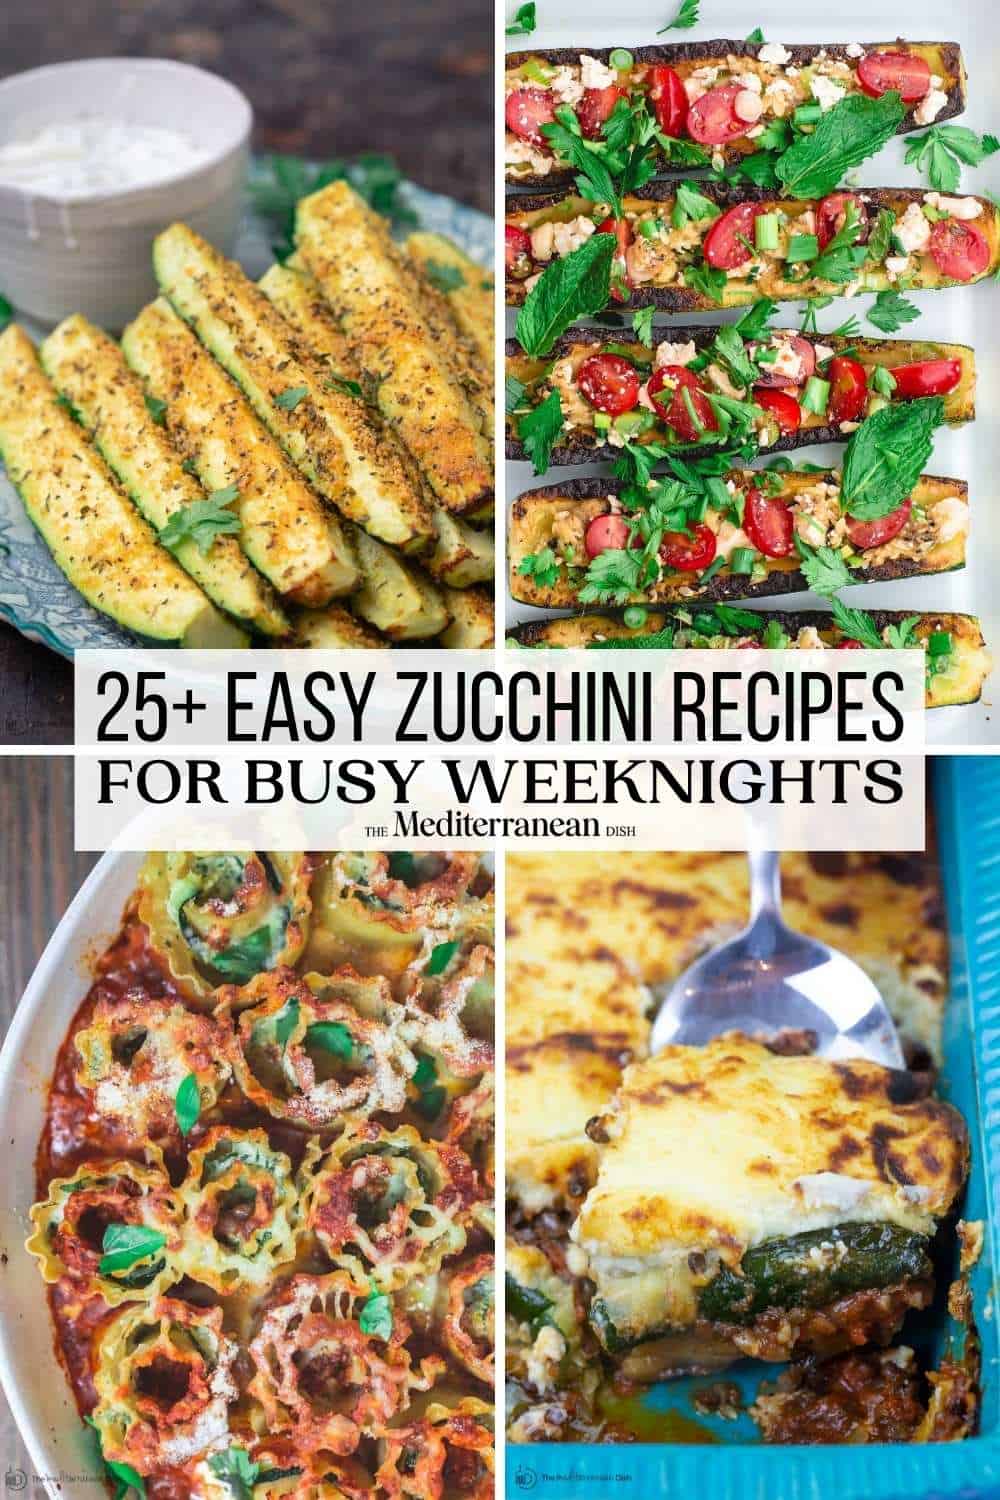 collage image and pin image 1 for best zucchini recipes featuring 4 zucchini recipes from The Mediterranean Dish.